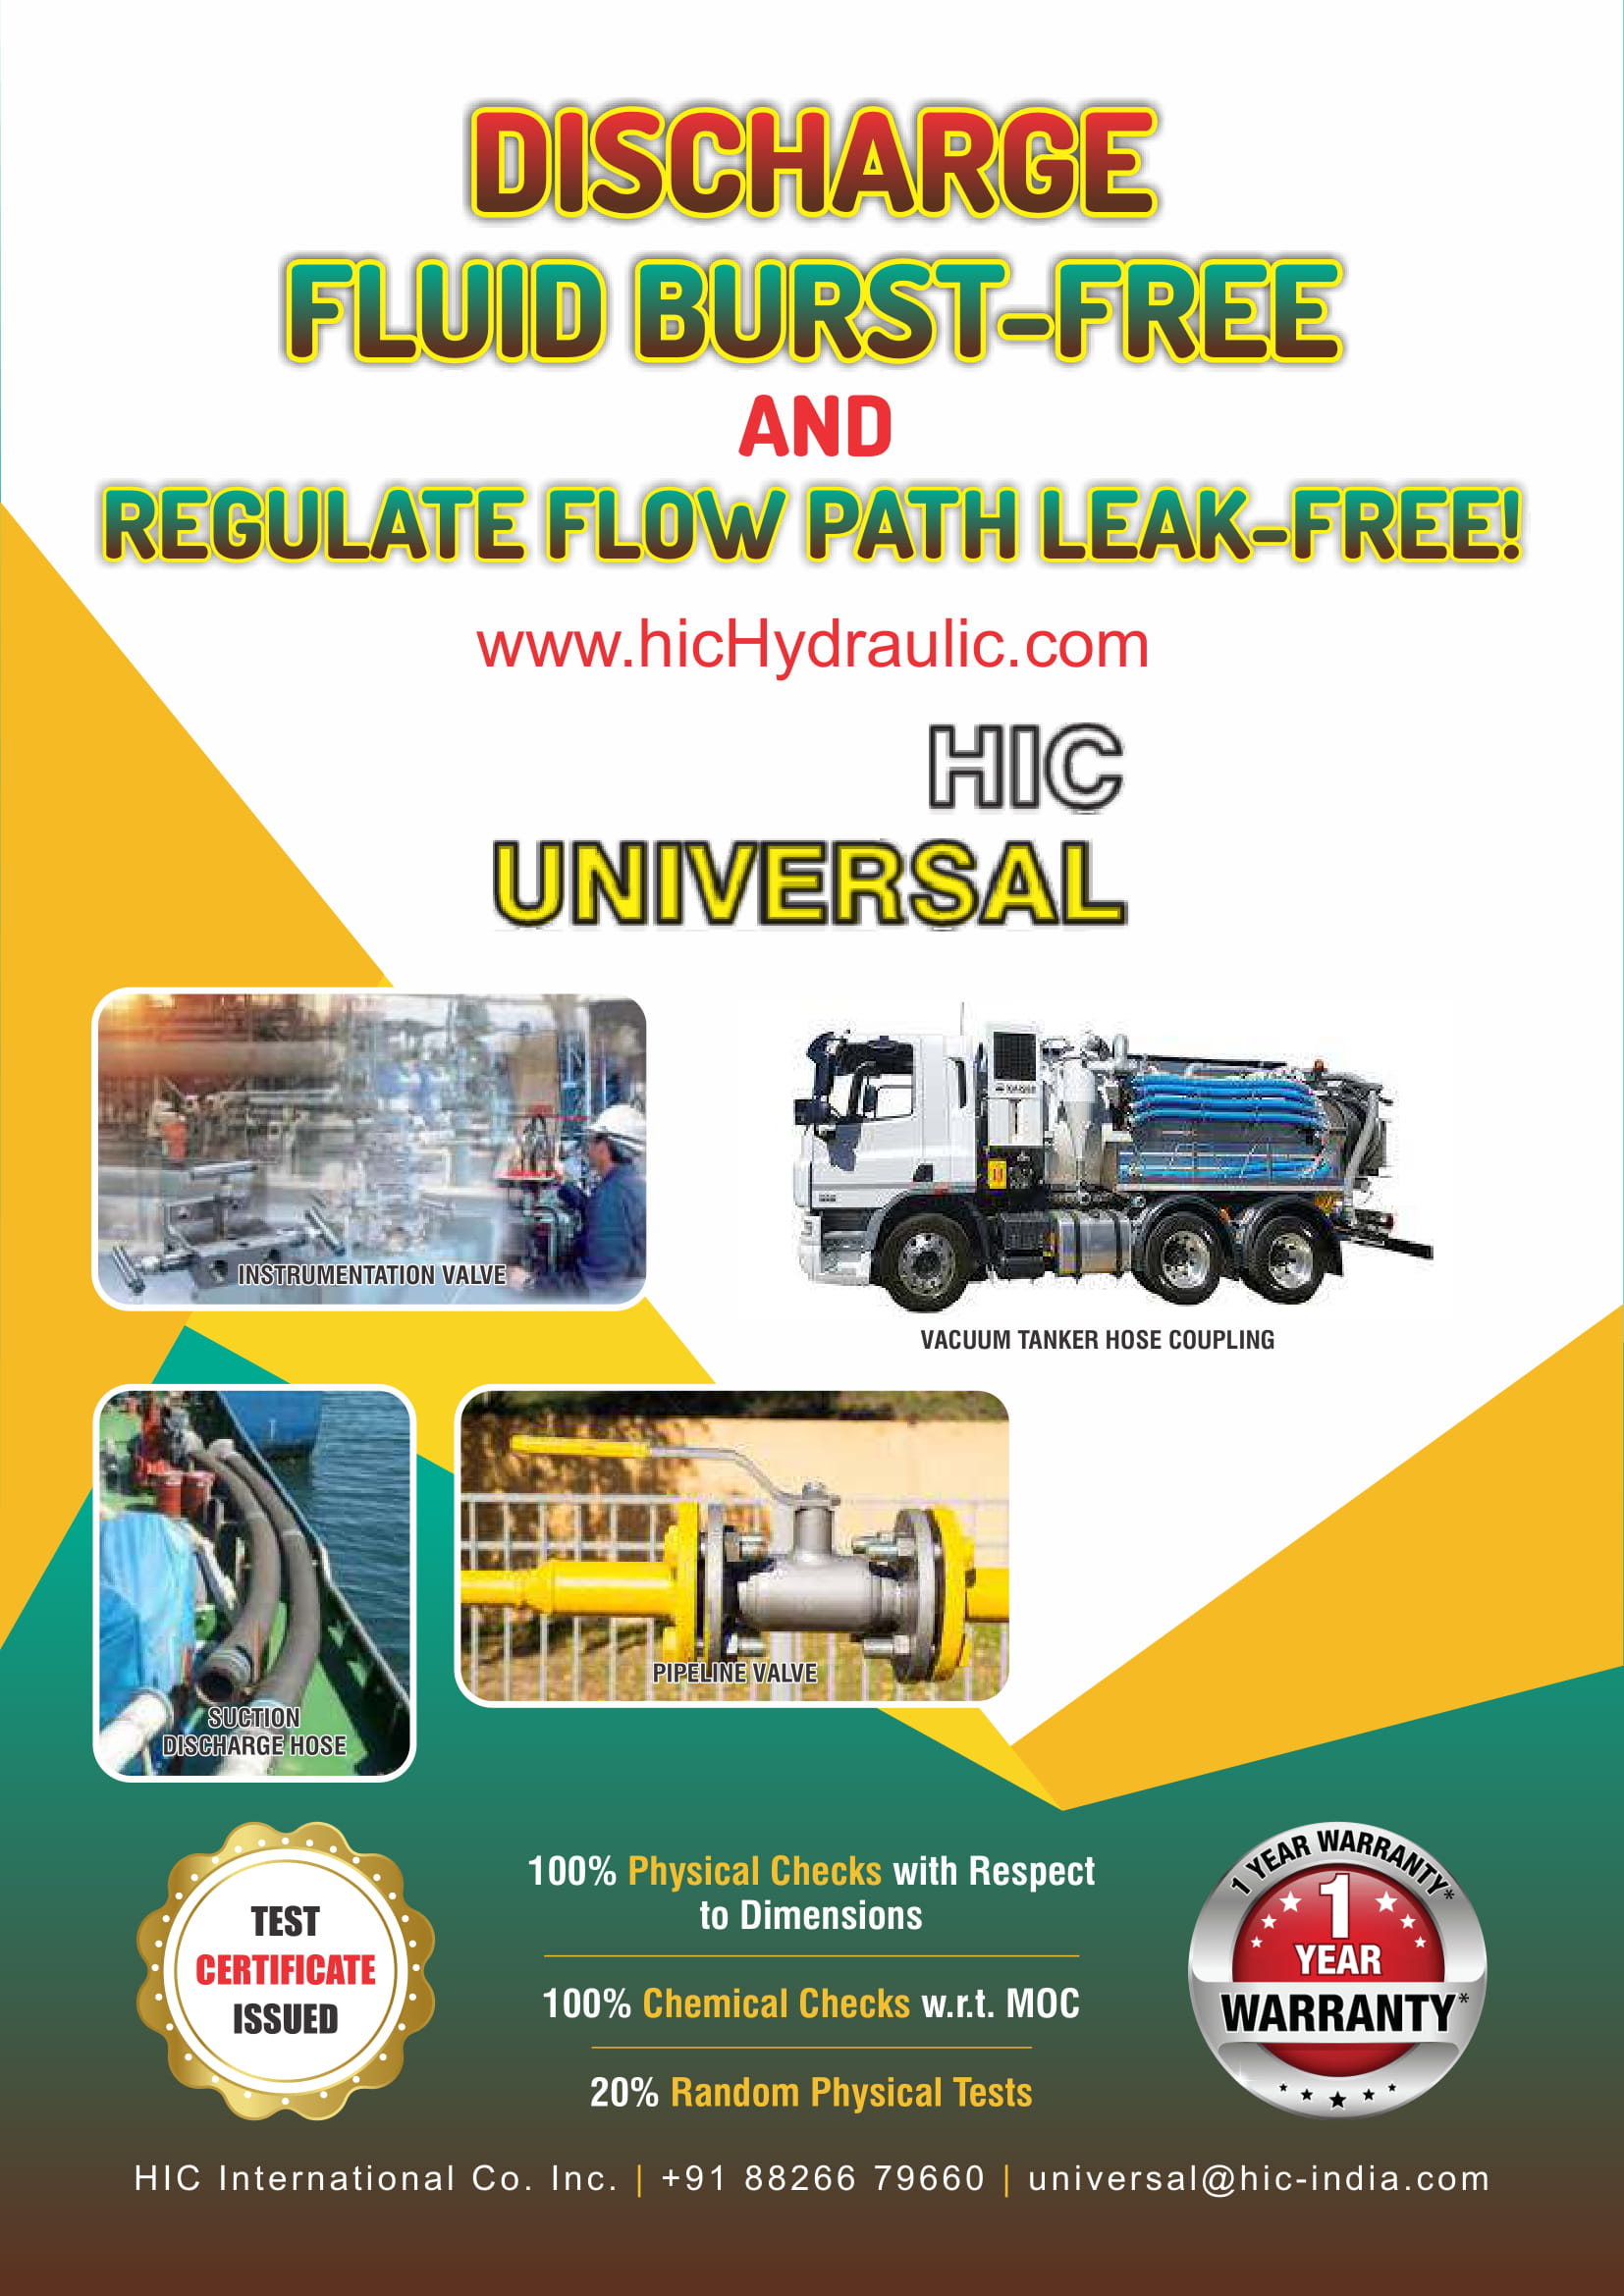 Discharge Fluid Brust Free and Rugulate Flow Path Leak Free